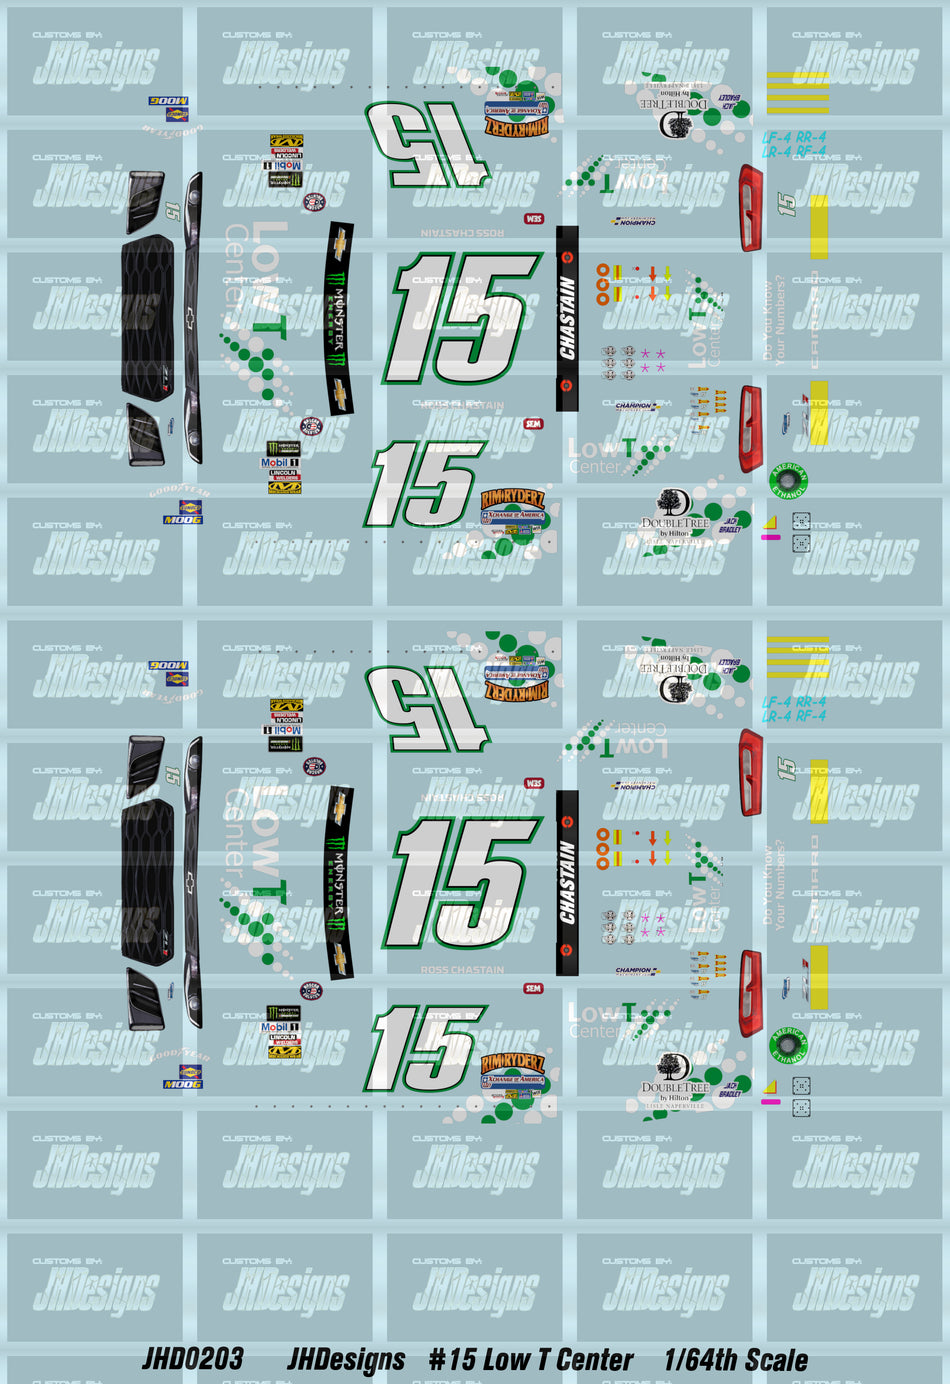 JH Designs Ross Chastain 2018 CUP #15 Low T Center 1:64 Racecar Decal Set